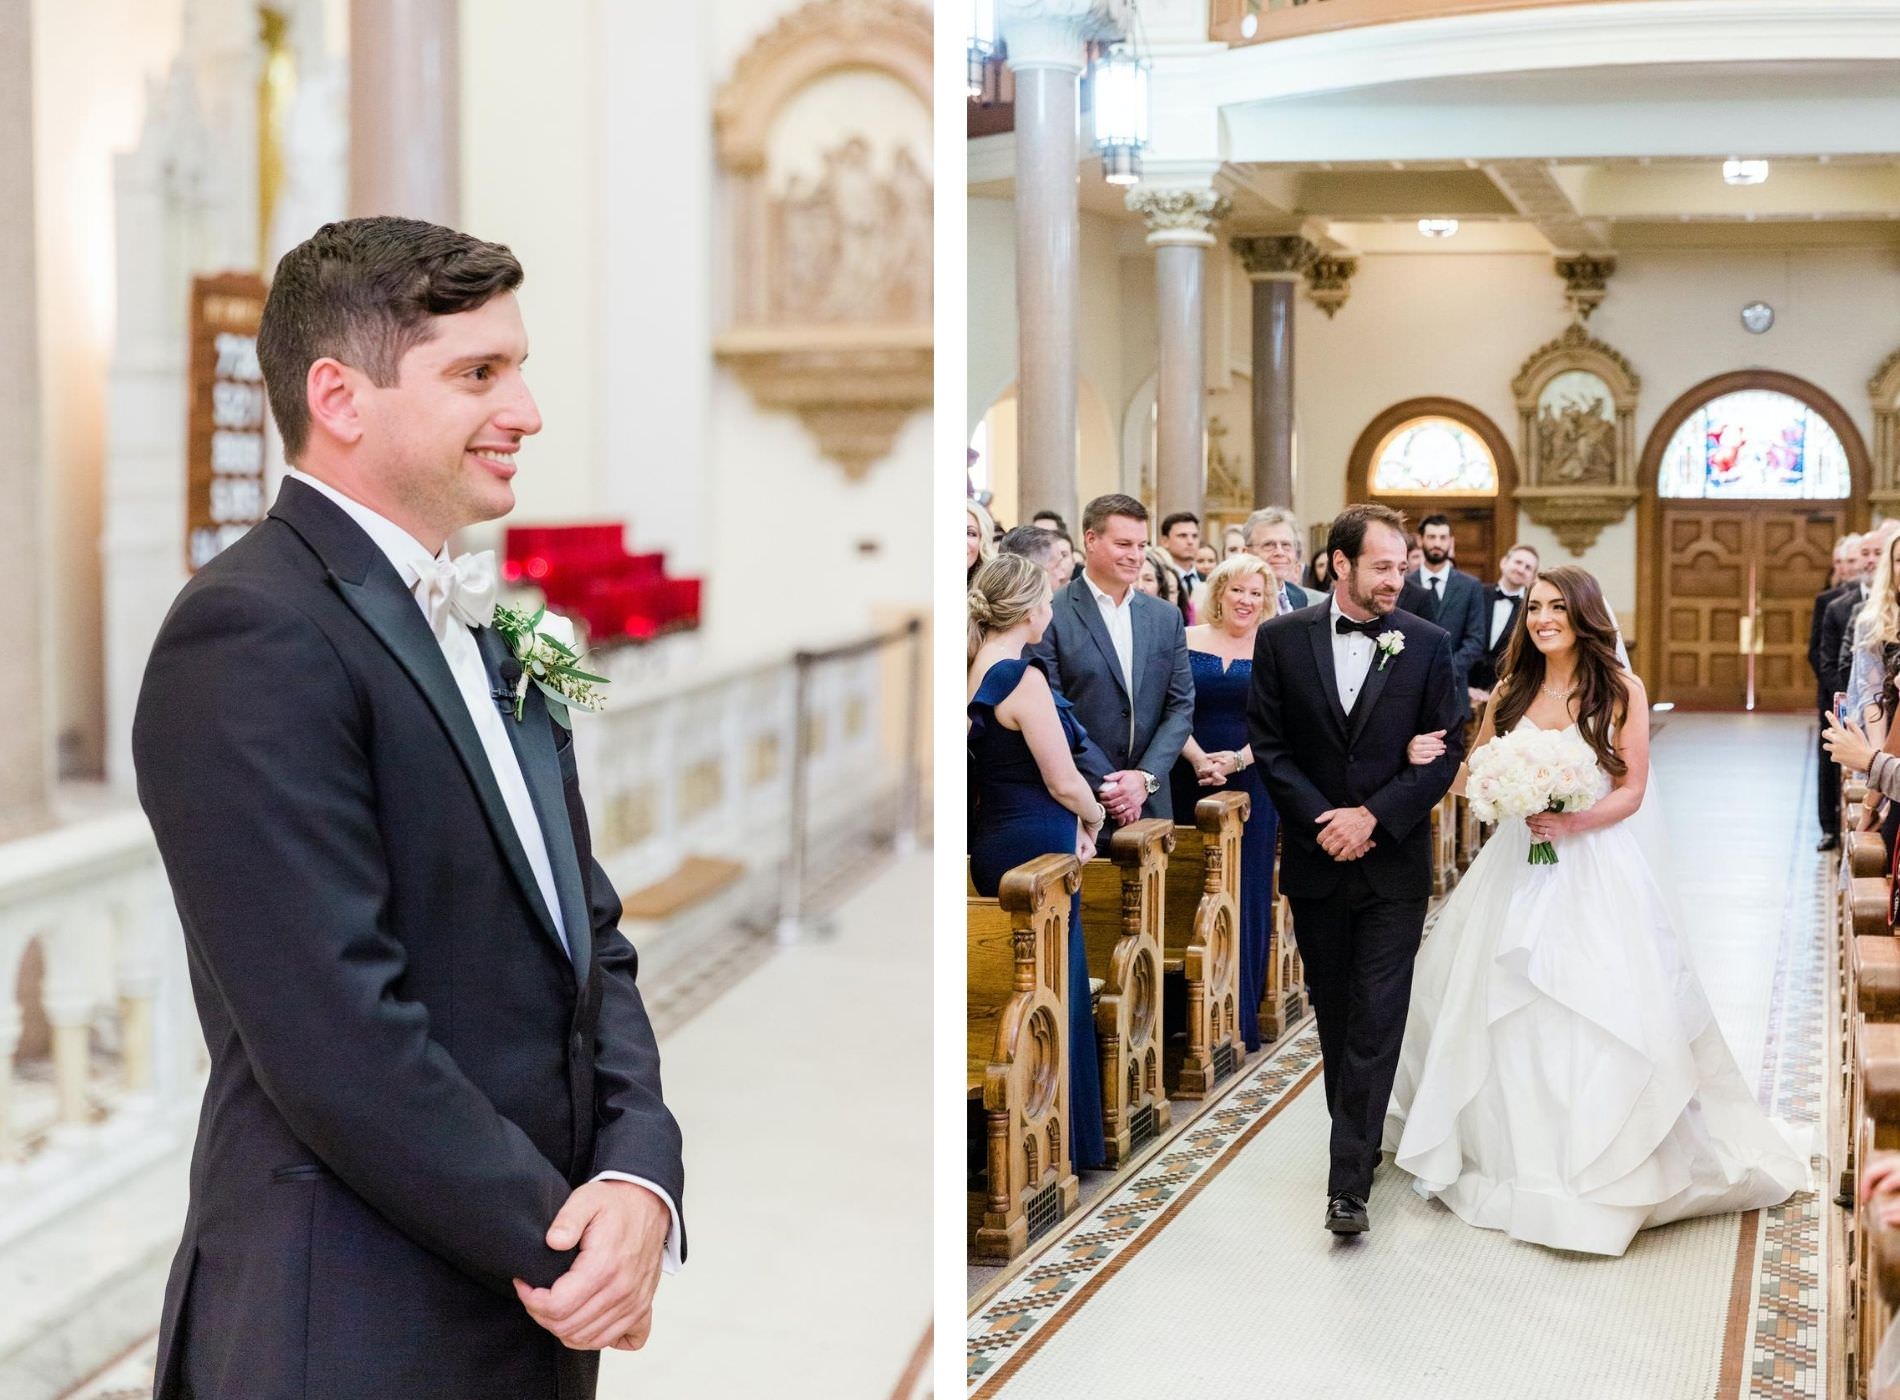 Florida Grooms Reaction to Bride Walking Down the Wedding Ceremony Aisle with Father Portrait | Tampa Bay Traditional Wedding Venue Sacred Heart Catholic Church